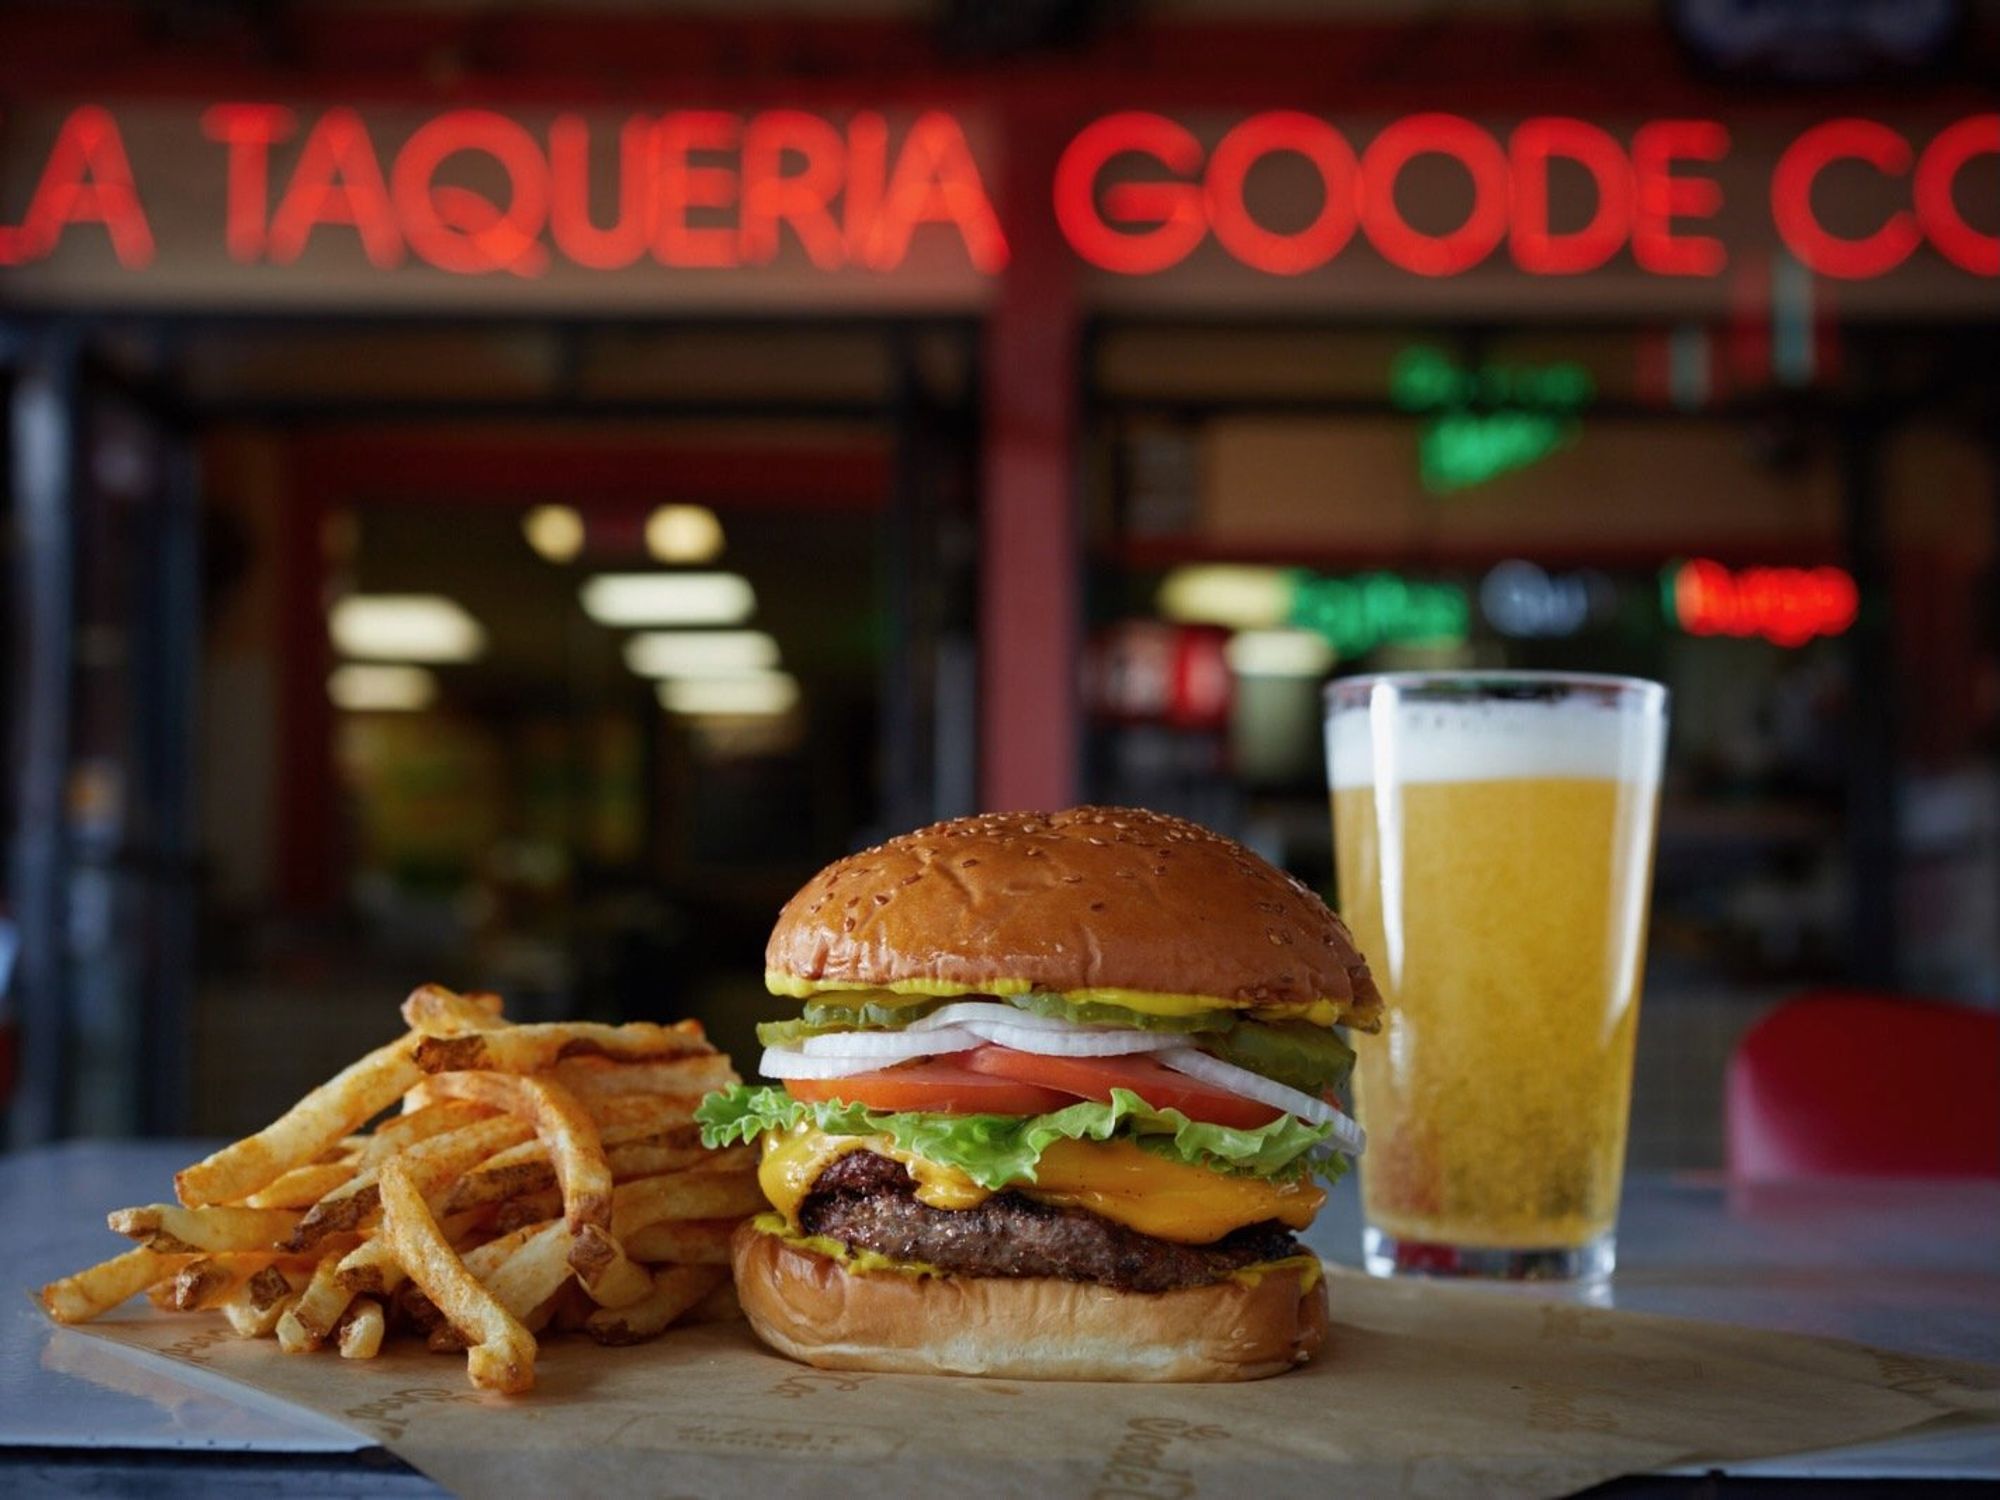 Goode Co taqueria burger and fries